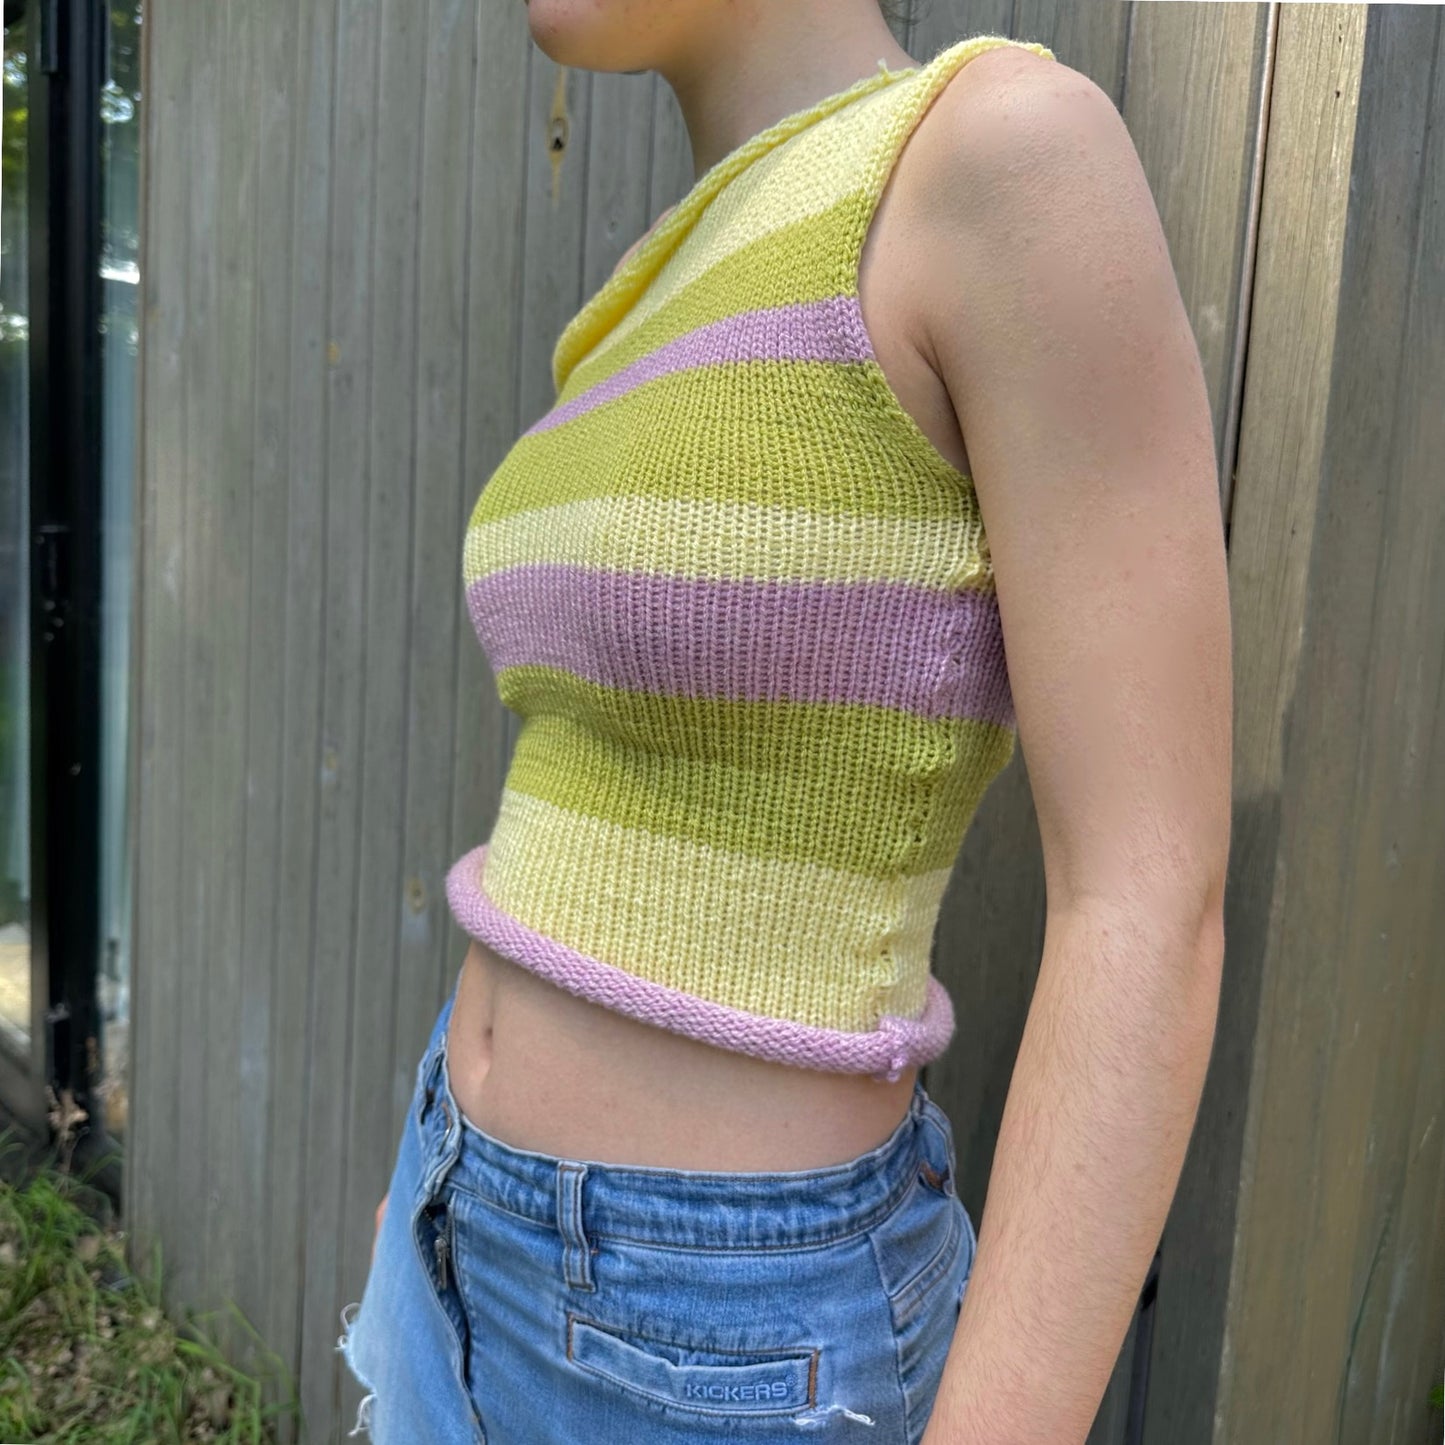 Handmade knitted uneven striped one shoulder asymmetrical top in dusky pink, pastel yellow and green